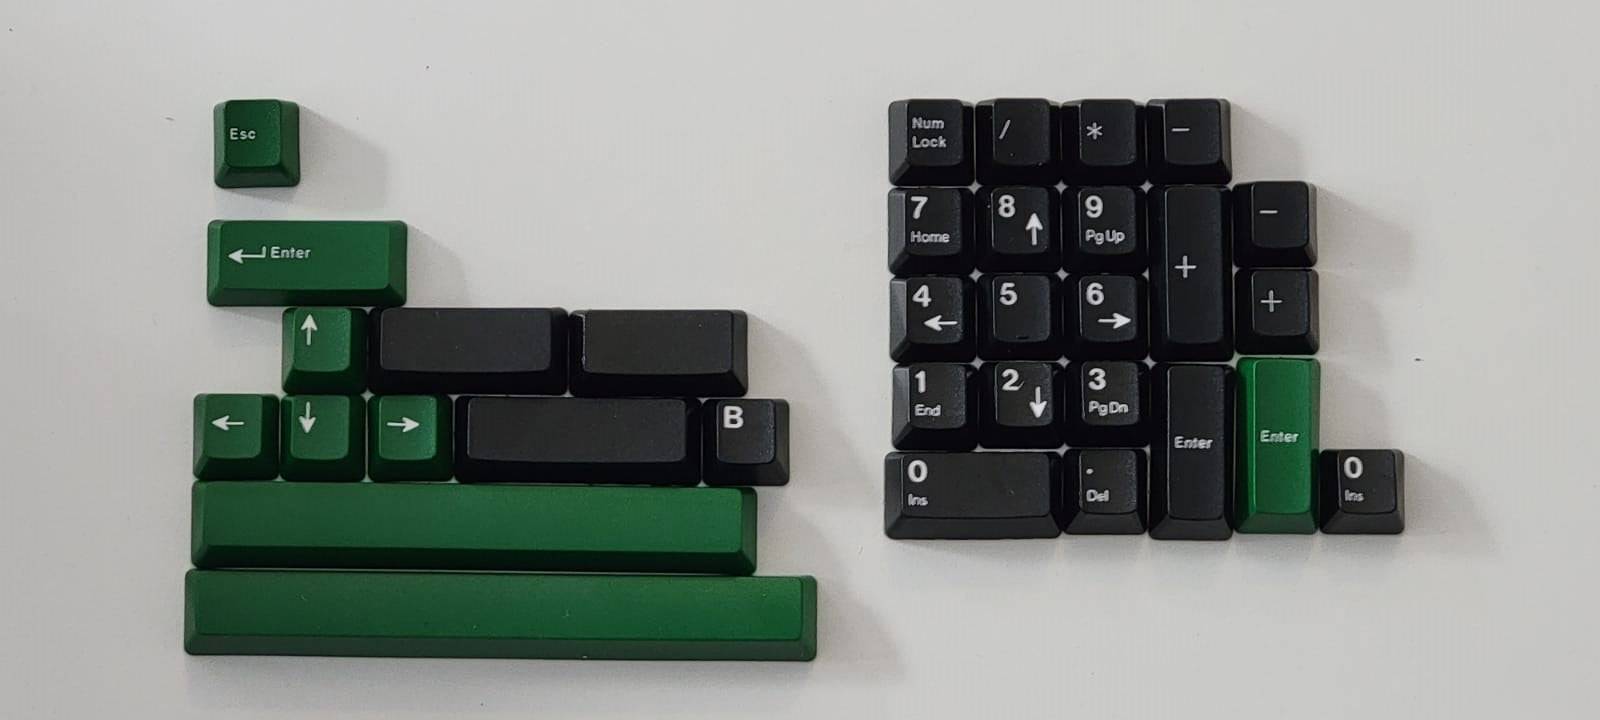 DCS White on Black Extension kit featuring green spacebars and arrow keys, for a different feel